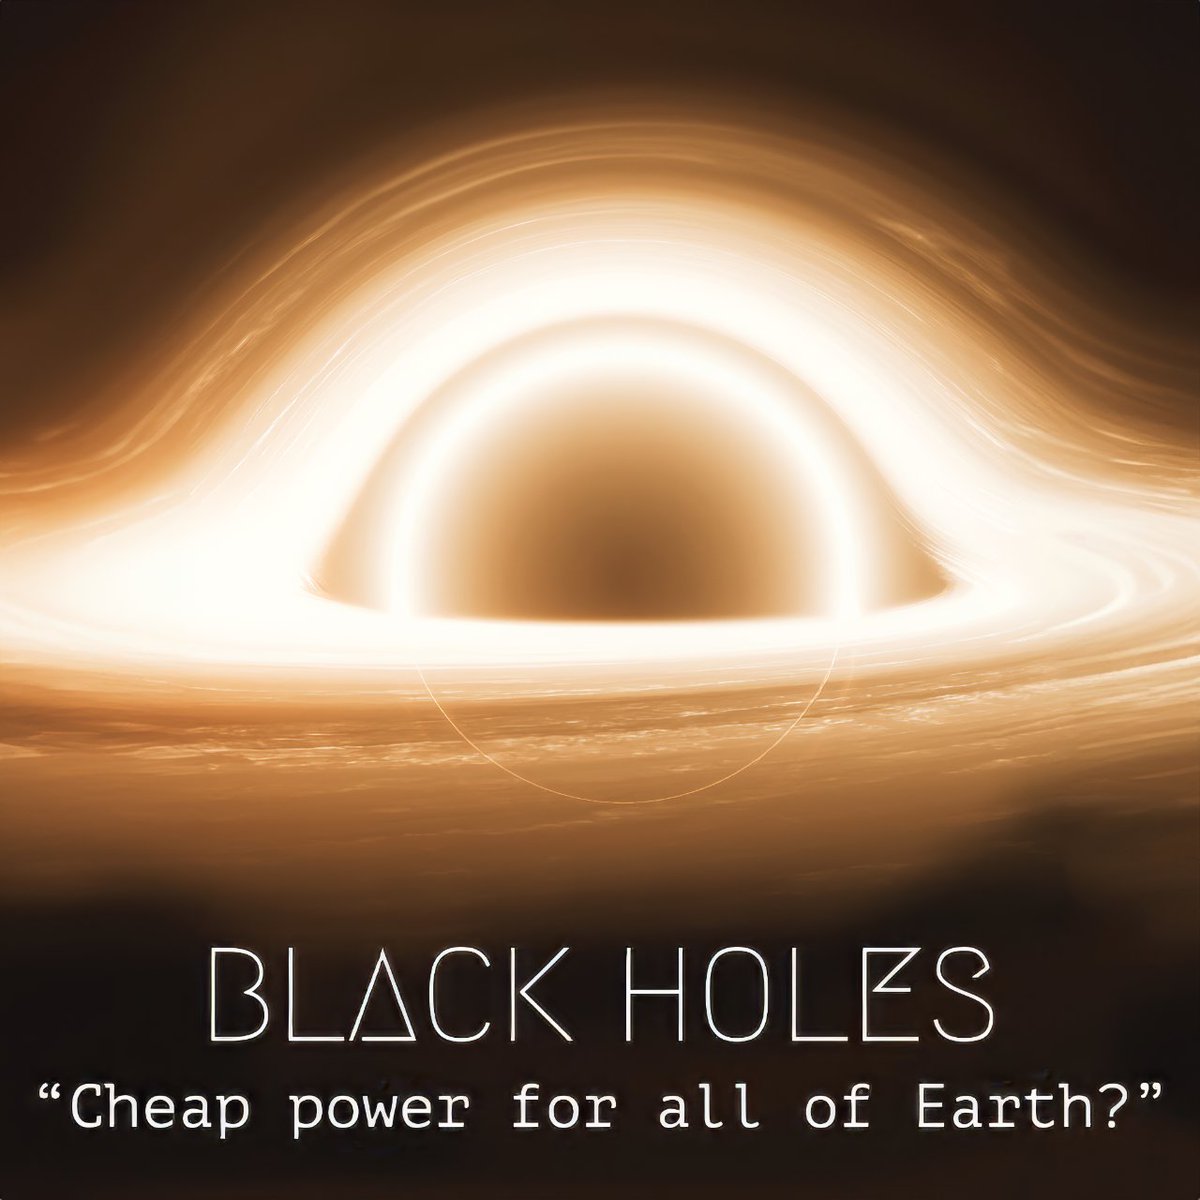 Can #BlackHoles provide cheap power to all of Earth? Is this real? Does #SciFi have #RealSolutions? Learn more at bit.ly/MEmasterpiece

#energy #savetheworld #modernenergy #alternativeenergy